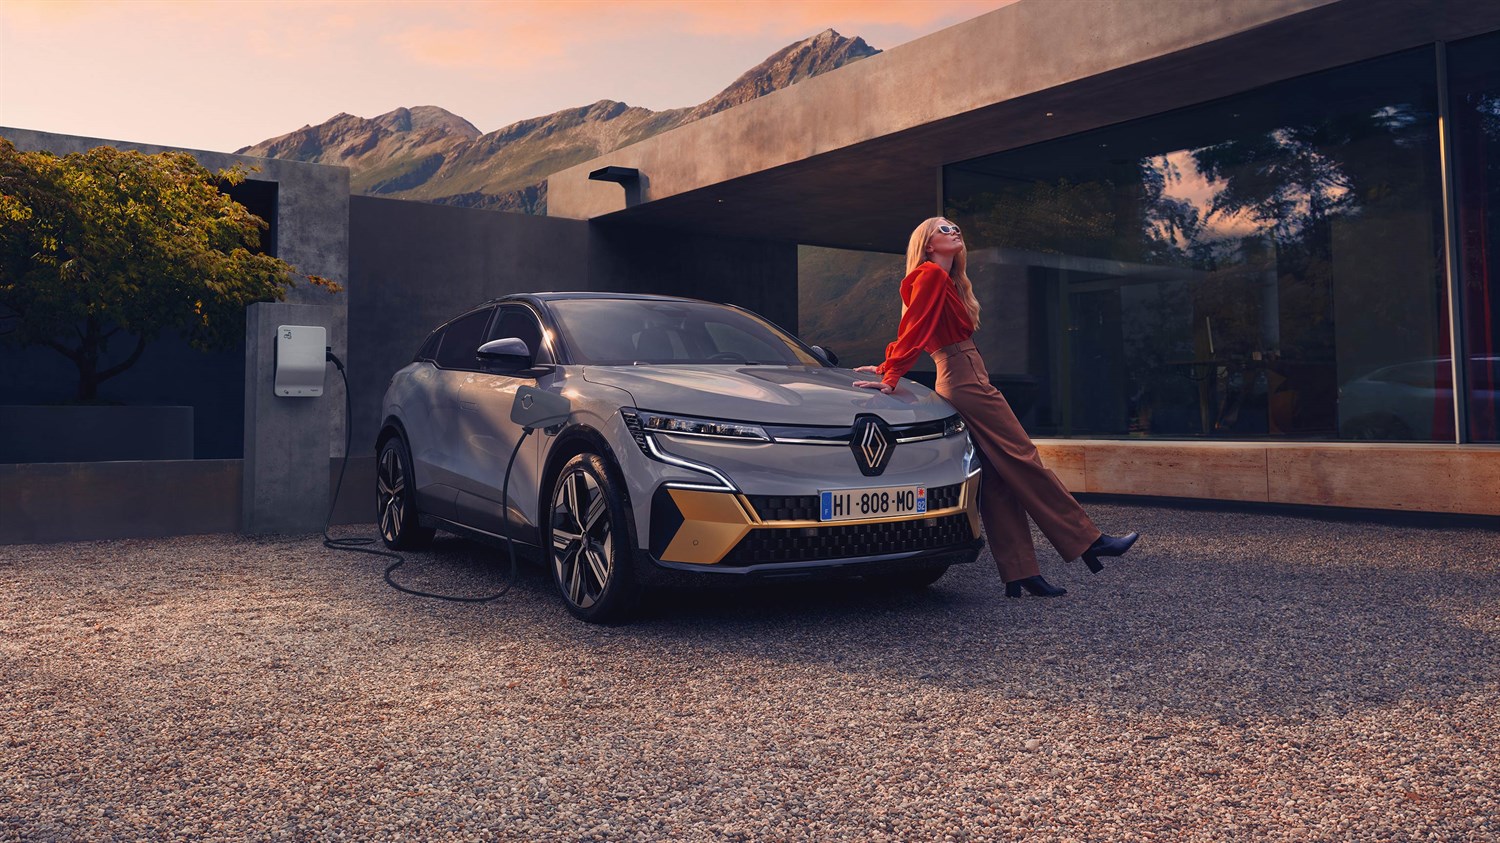 All-new Renault Megane E-Tech 100% electric - electric motor power